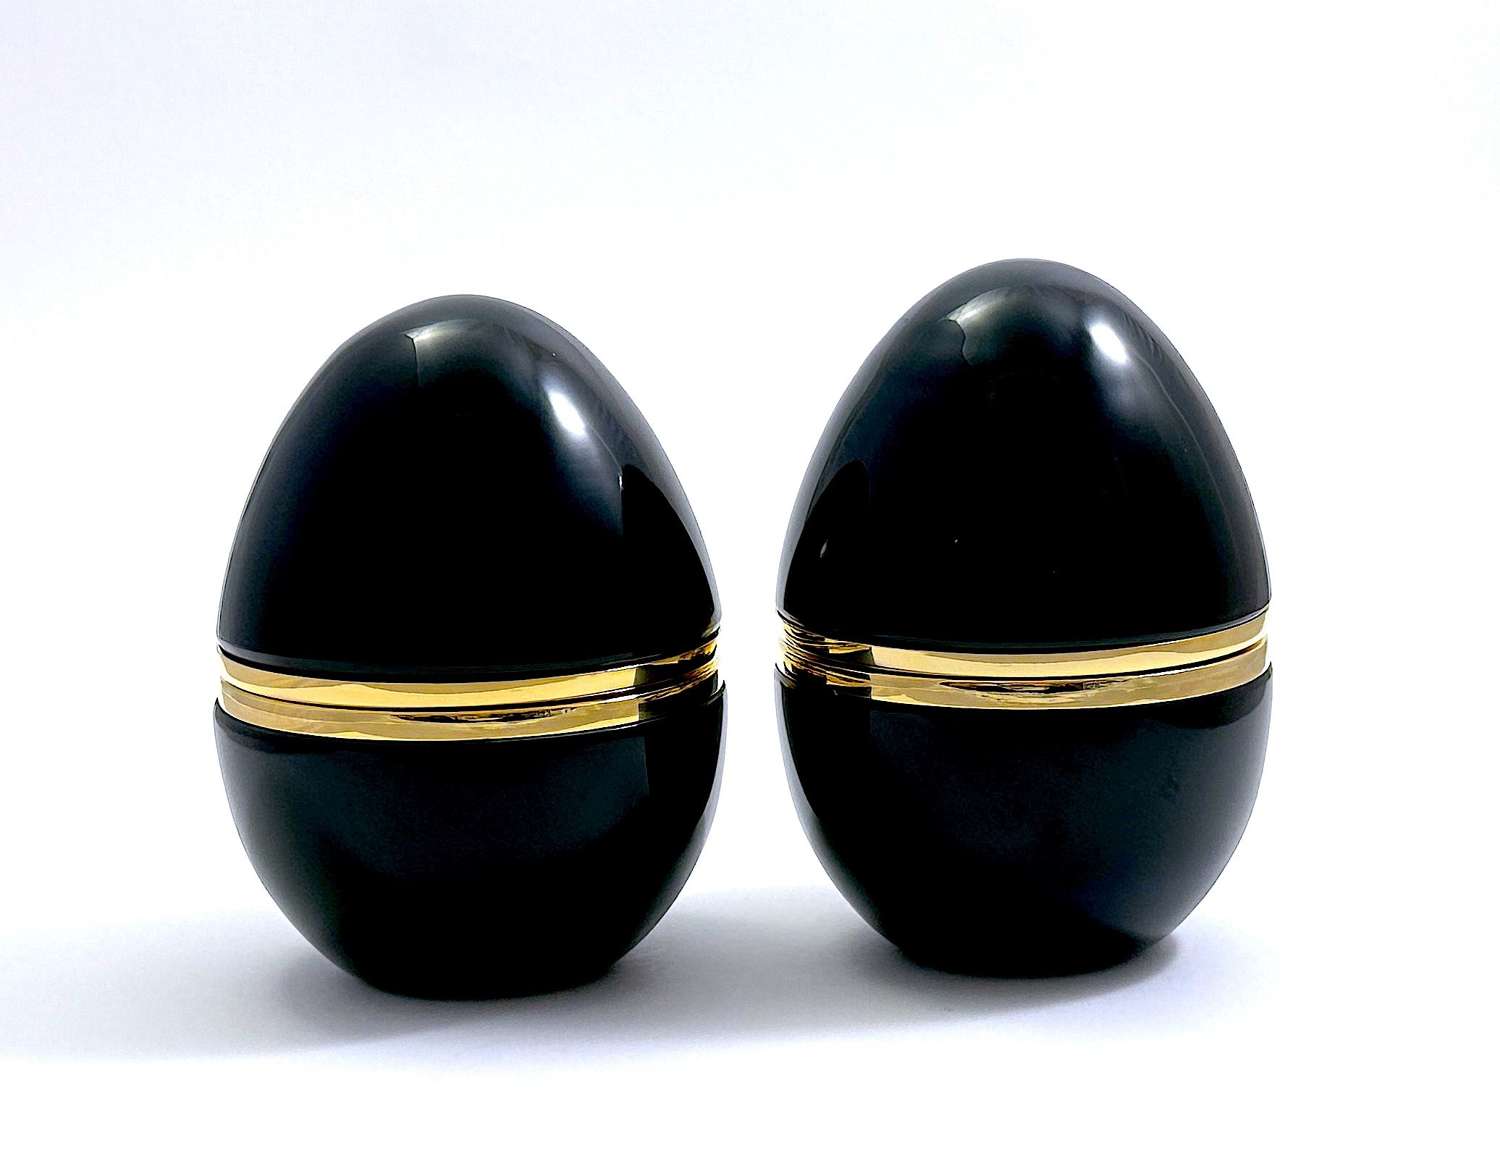 A Large Pair of Antique Murano Black Opaline Glass Egg Shaped Boxes